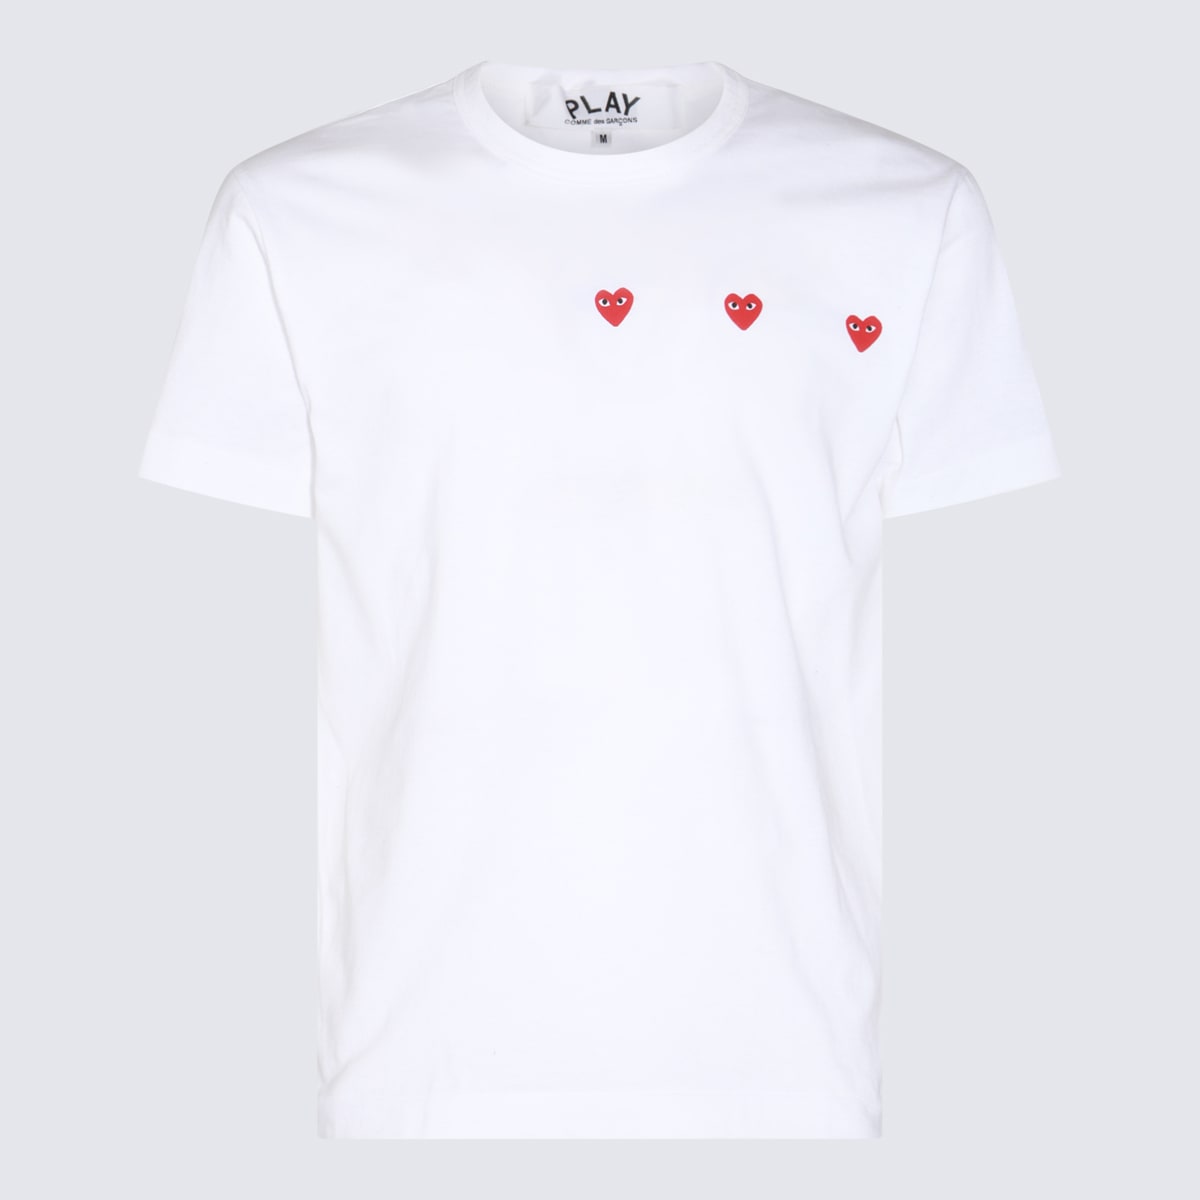 Comme des Garçons Play White And Red Cotton Play T-shirt